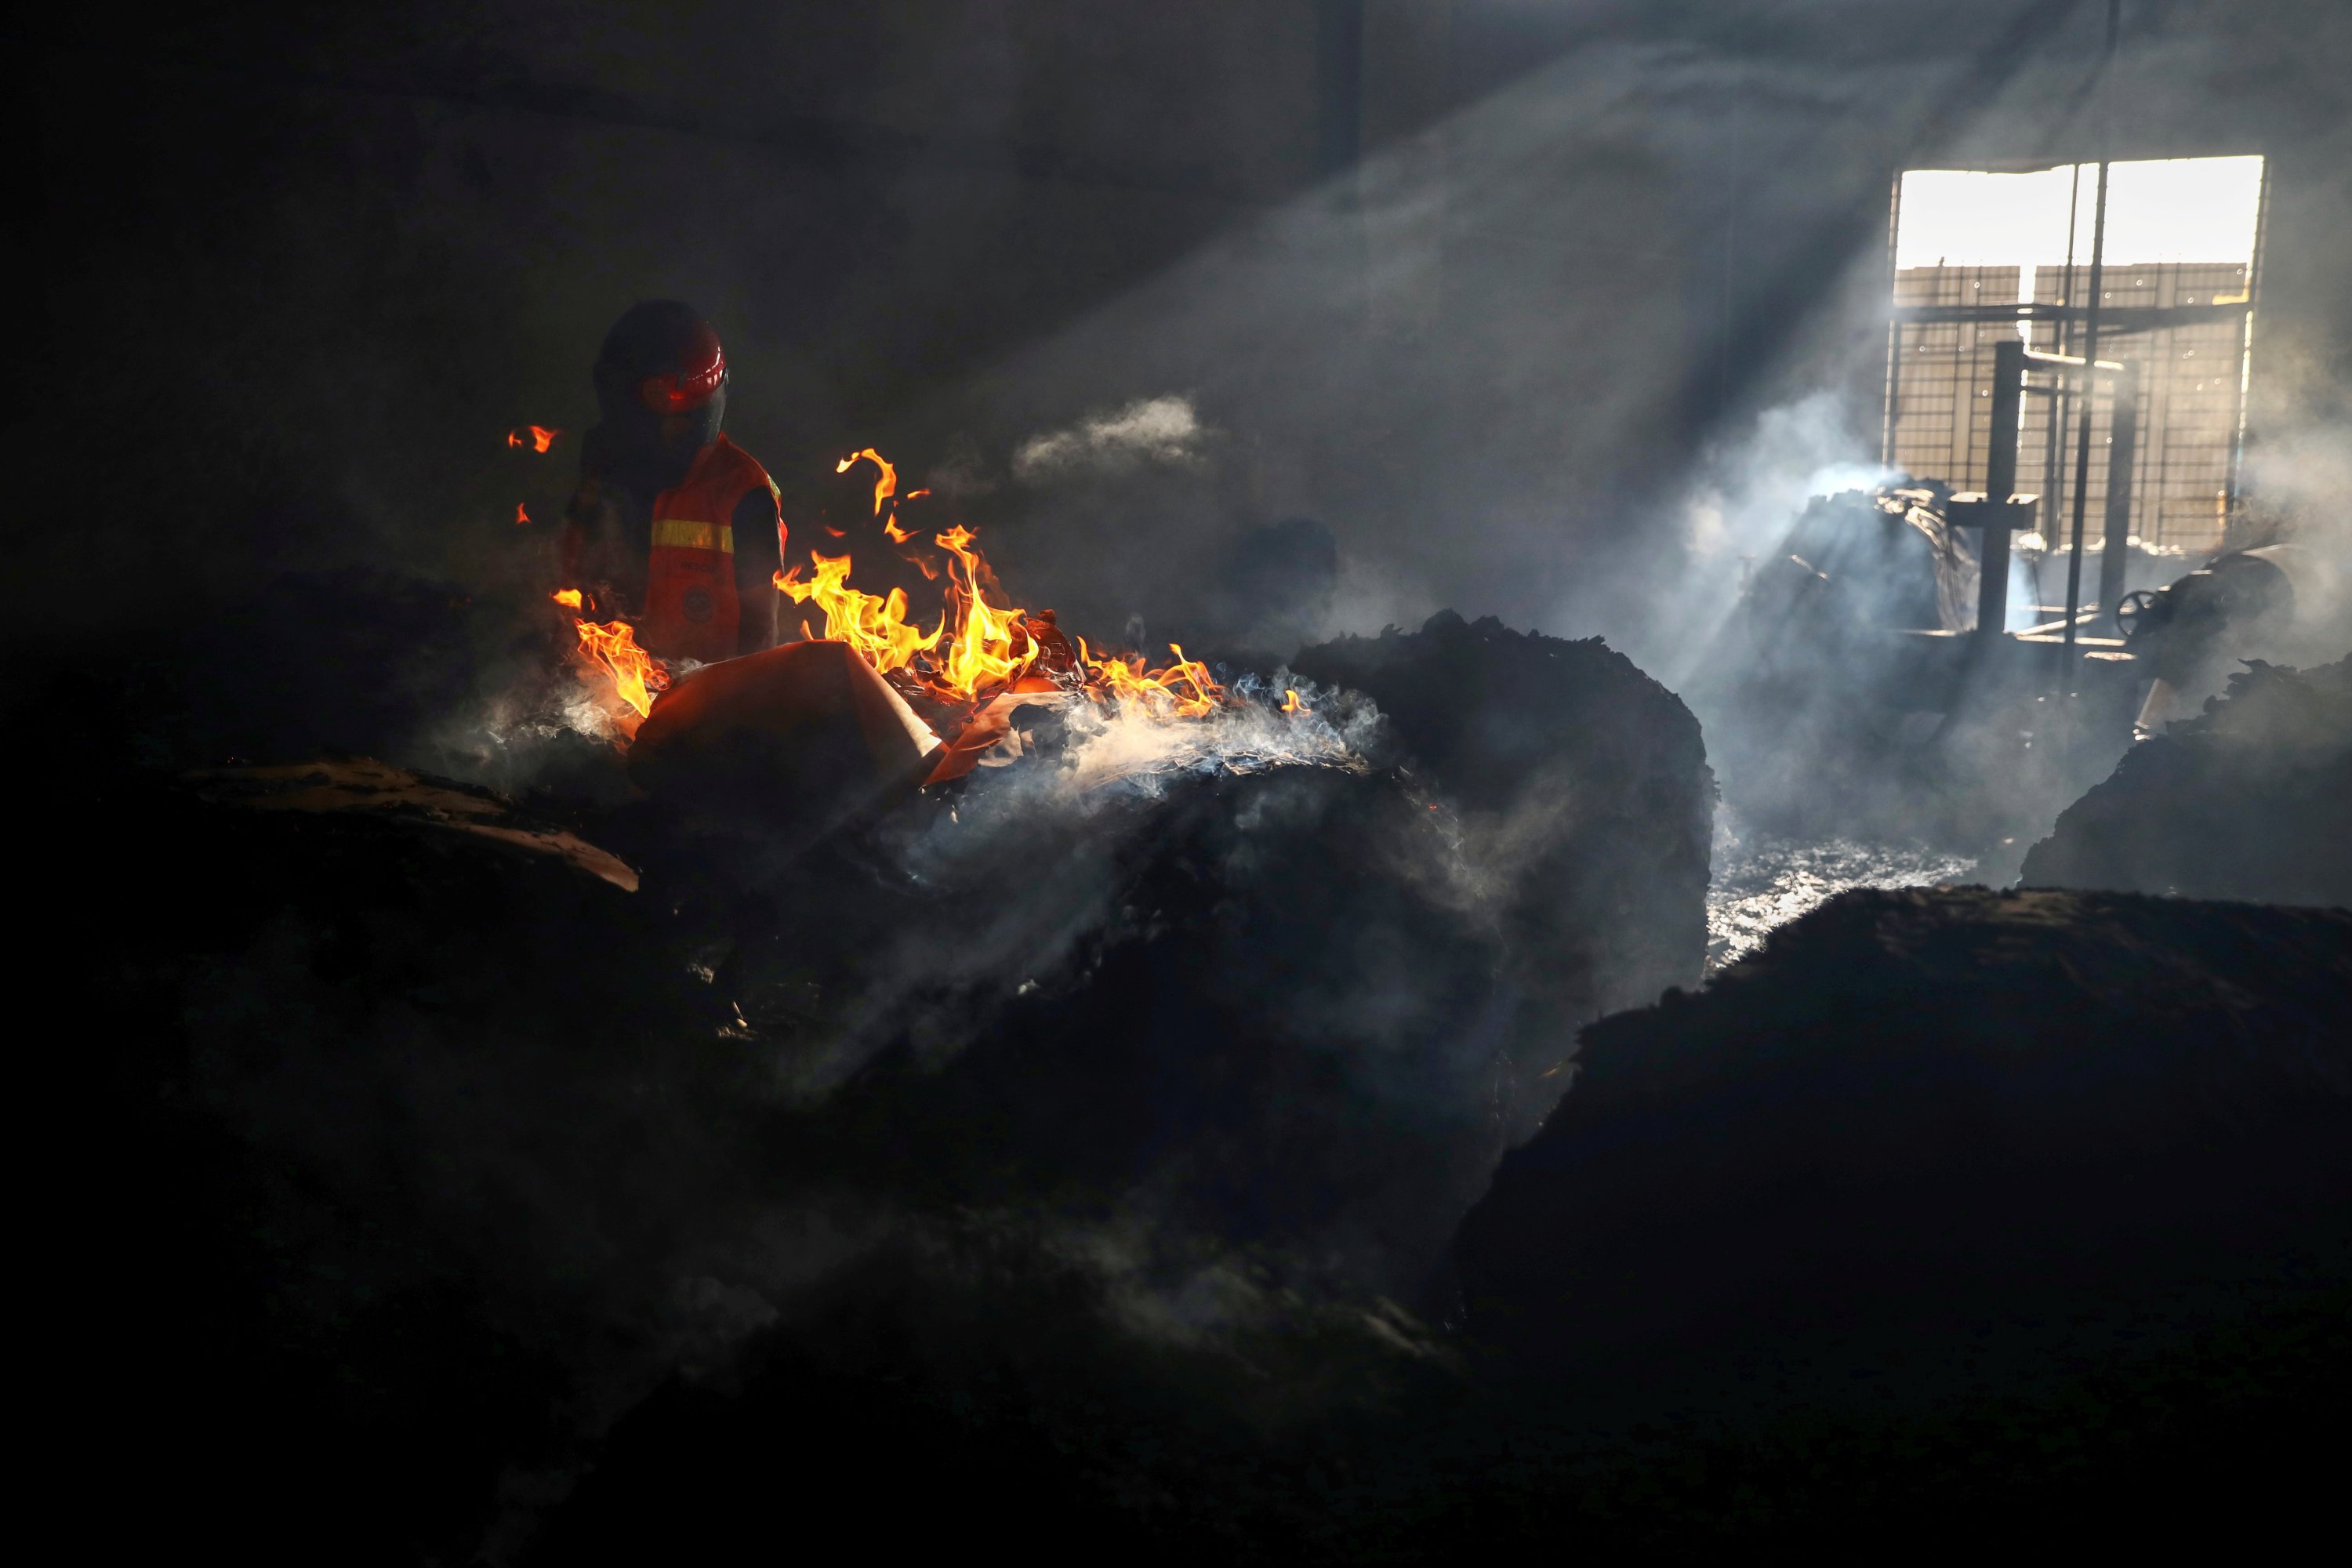 A firefighter tries to extinguish fire inside the building after a fire broke out at a factory named Hashem Foods Ltd. in Rupganj of Narayanganj district, on the outskirts of Dhaka, Bangladesh, July 9, 2021. (Reuters Photo)